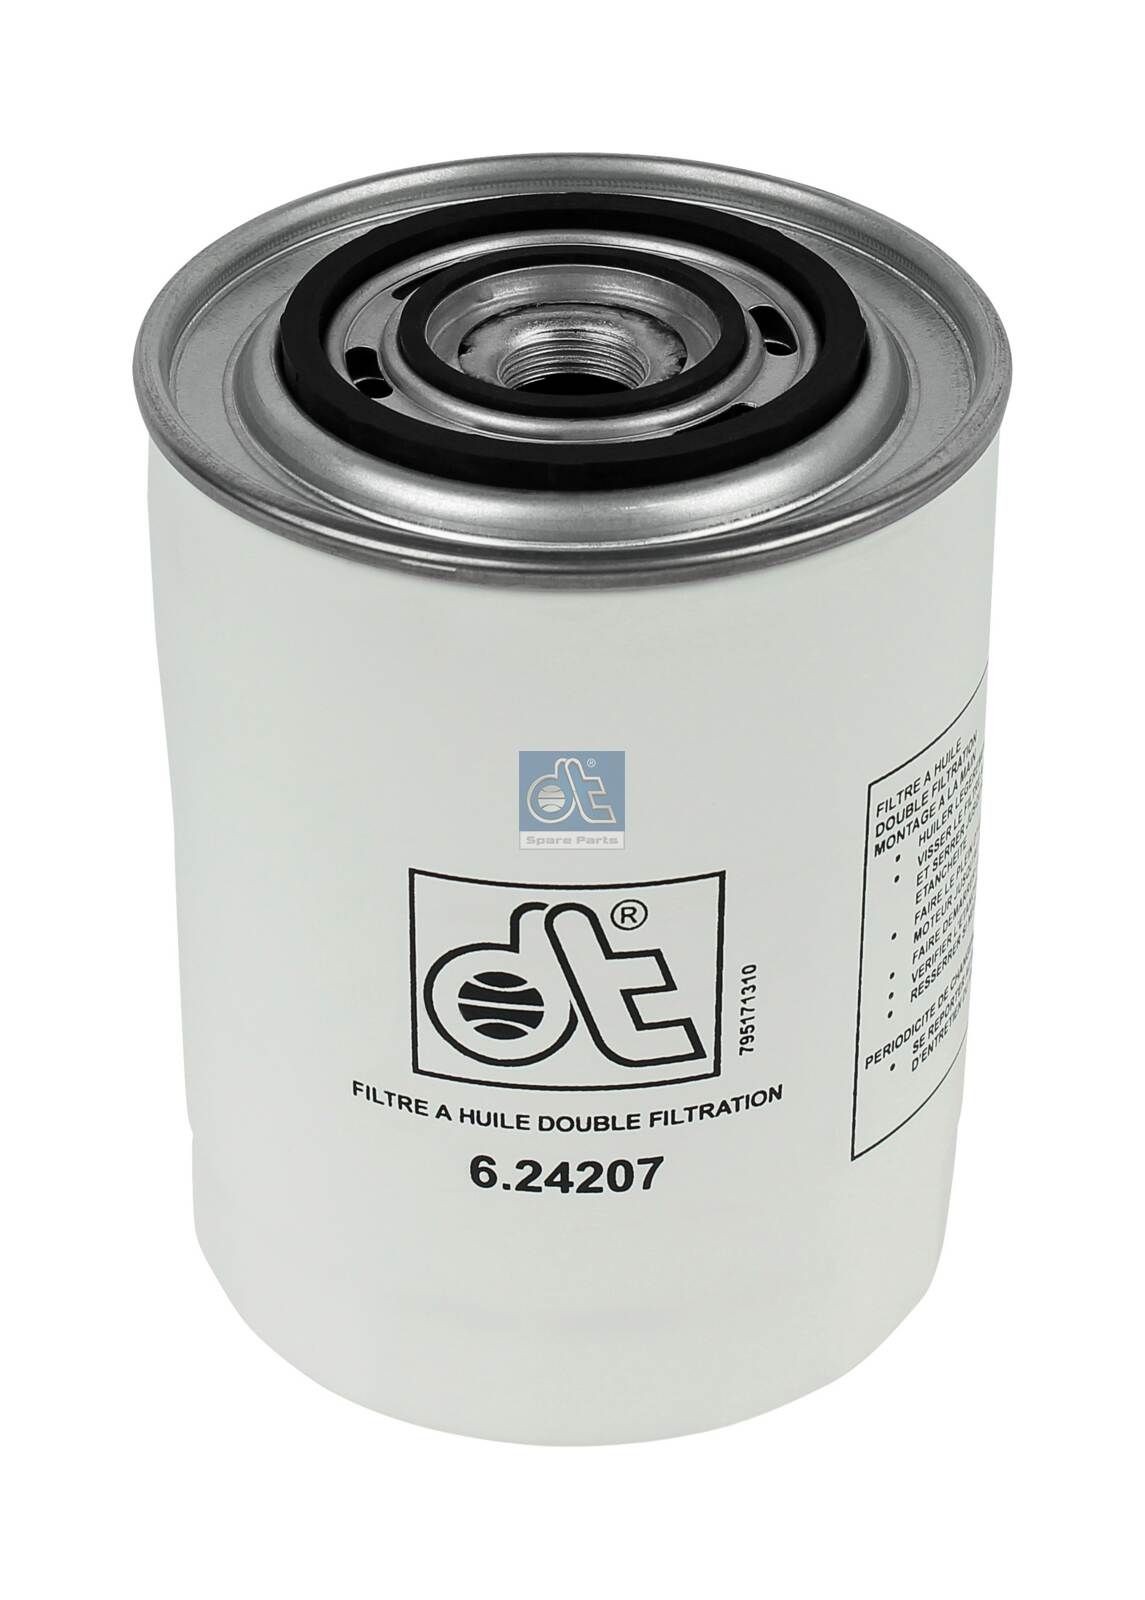 WP 1144 DT Spare Parts 6.24207 Oil filter 1109.P6